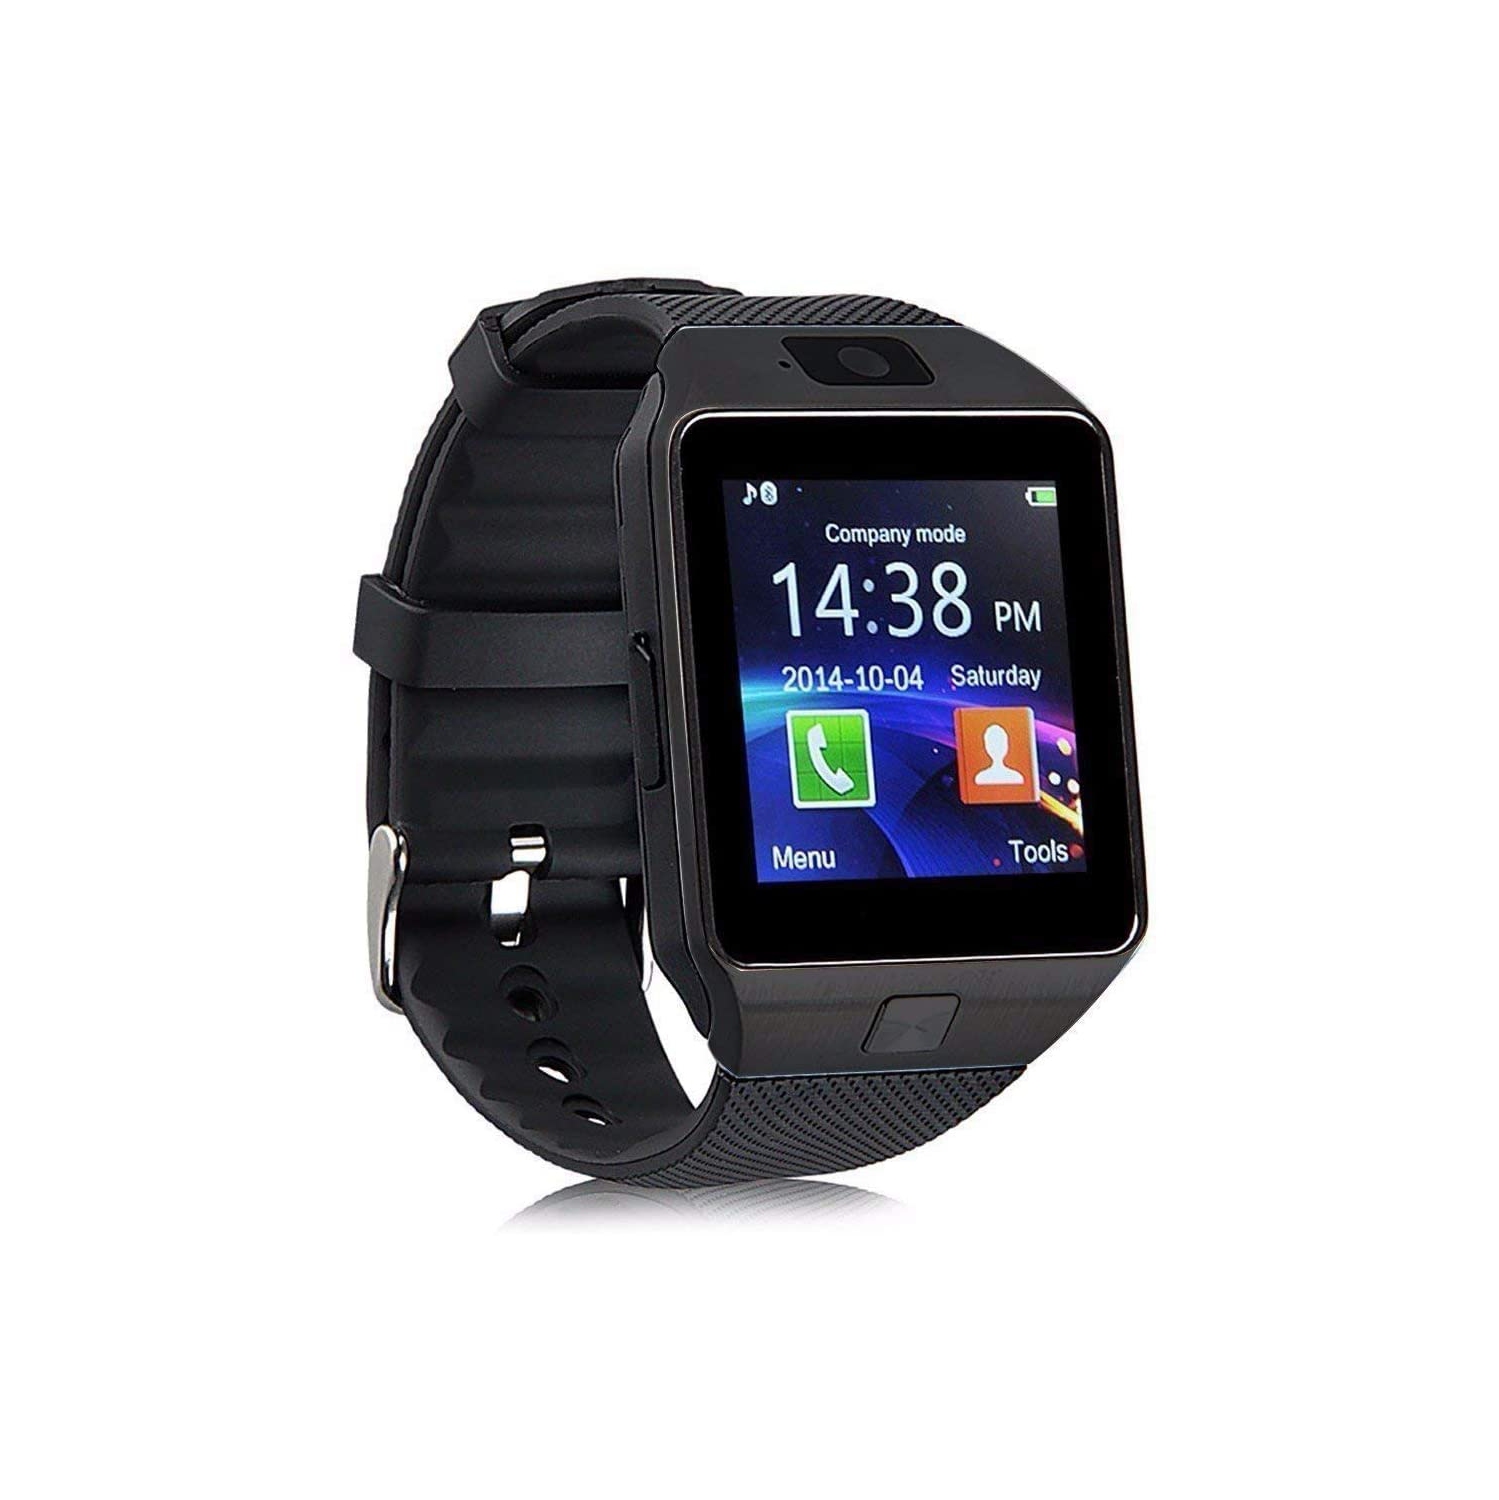 Bluetooth Smart Watch Touch Screen with Camera, SIM Card TF/SD Card Slot, for iPhone and Android Phones (Black)